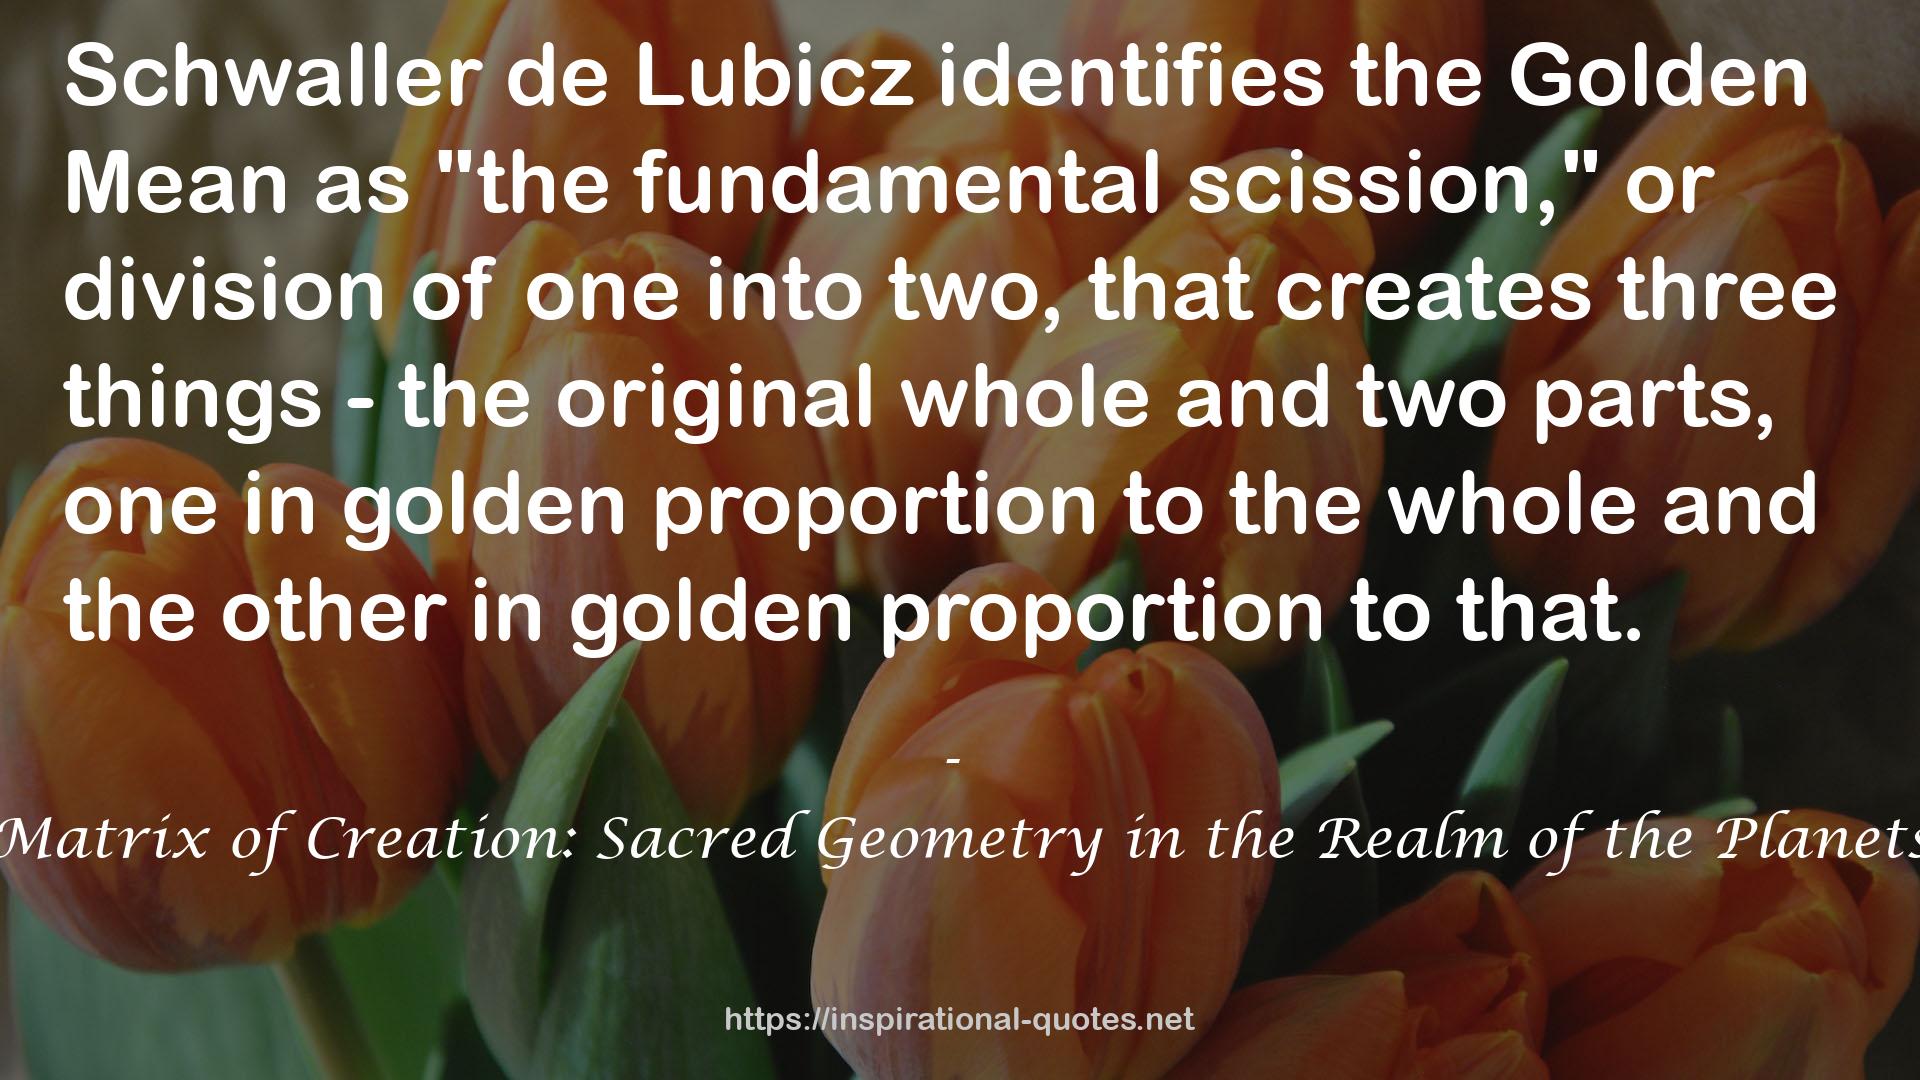 Matrix of Creation: Sacred Geometry in the Realm of the Planets QUOTES